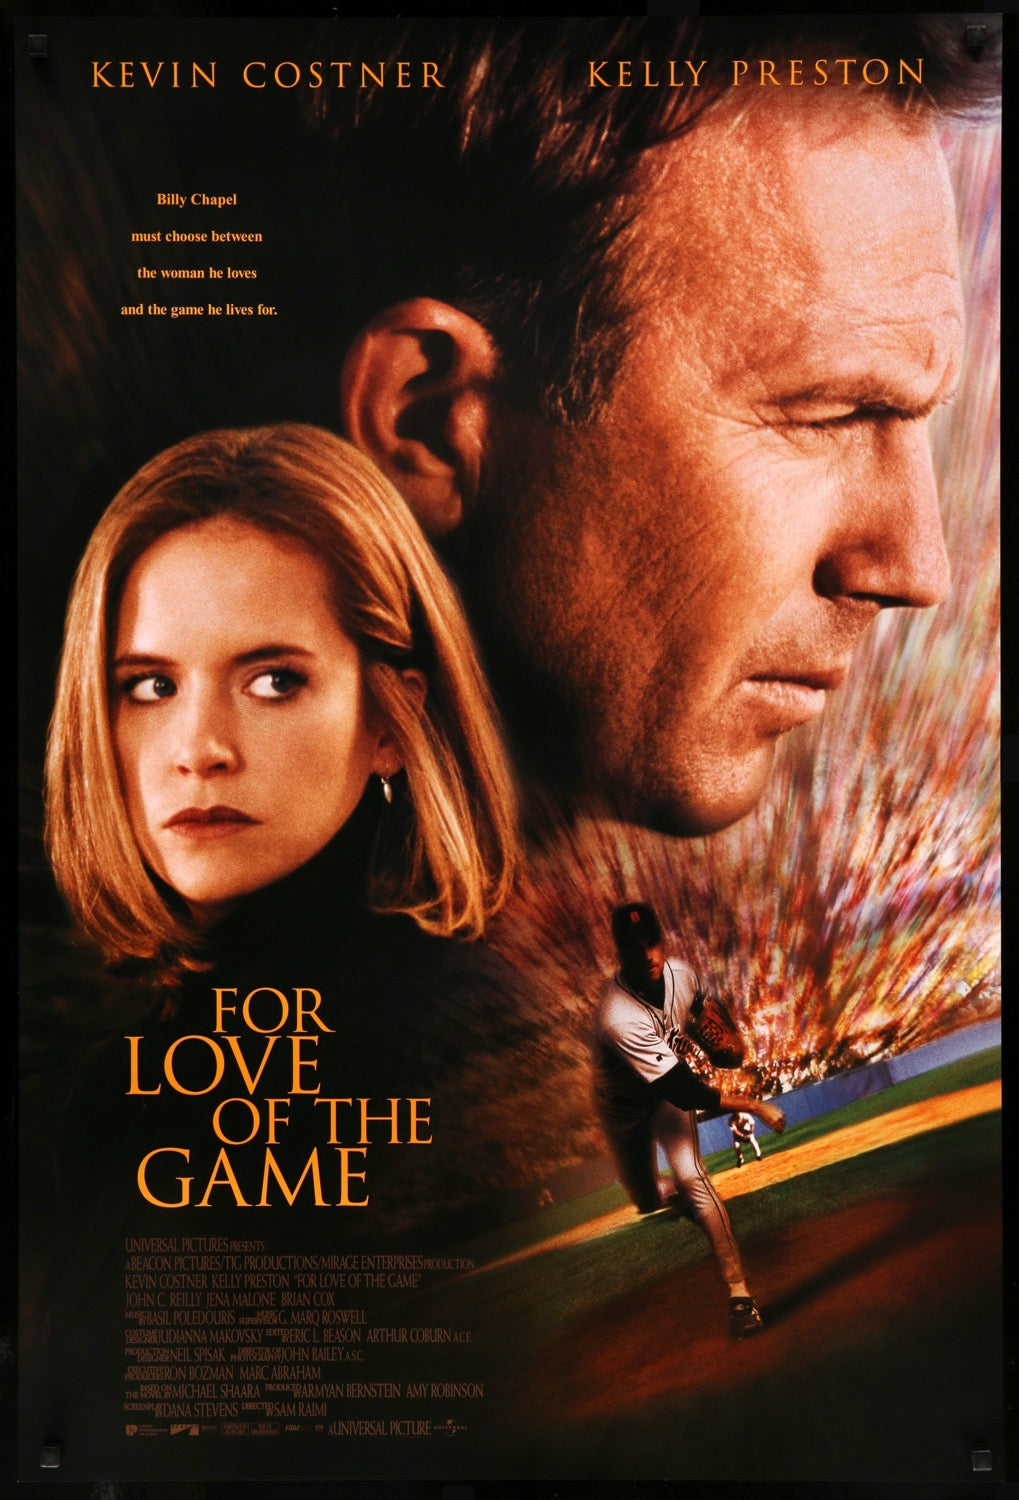 For Love of the Game (1999) original movie poster for sale at Original Film Art